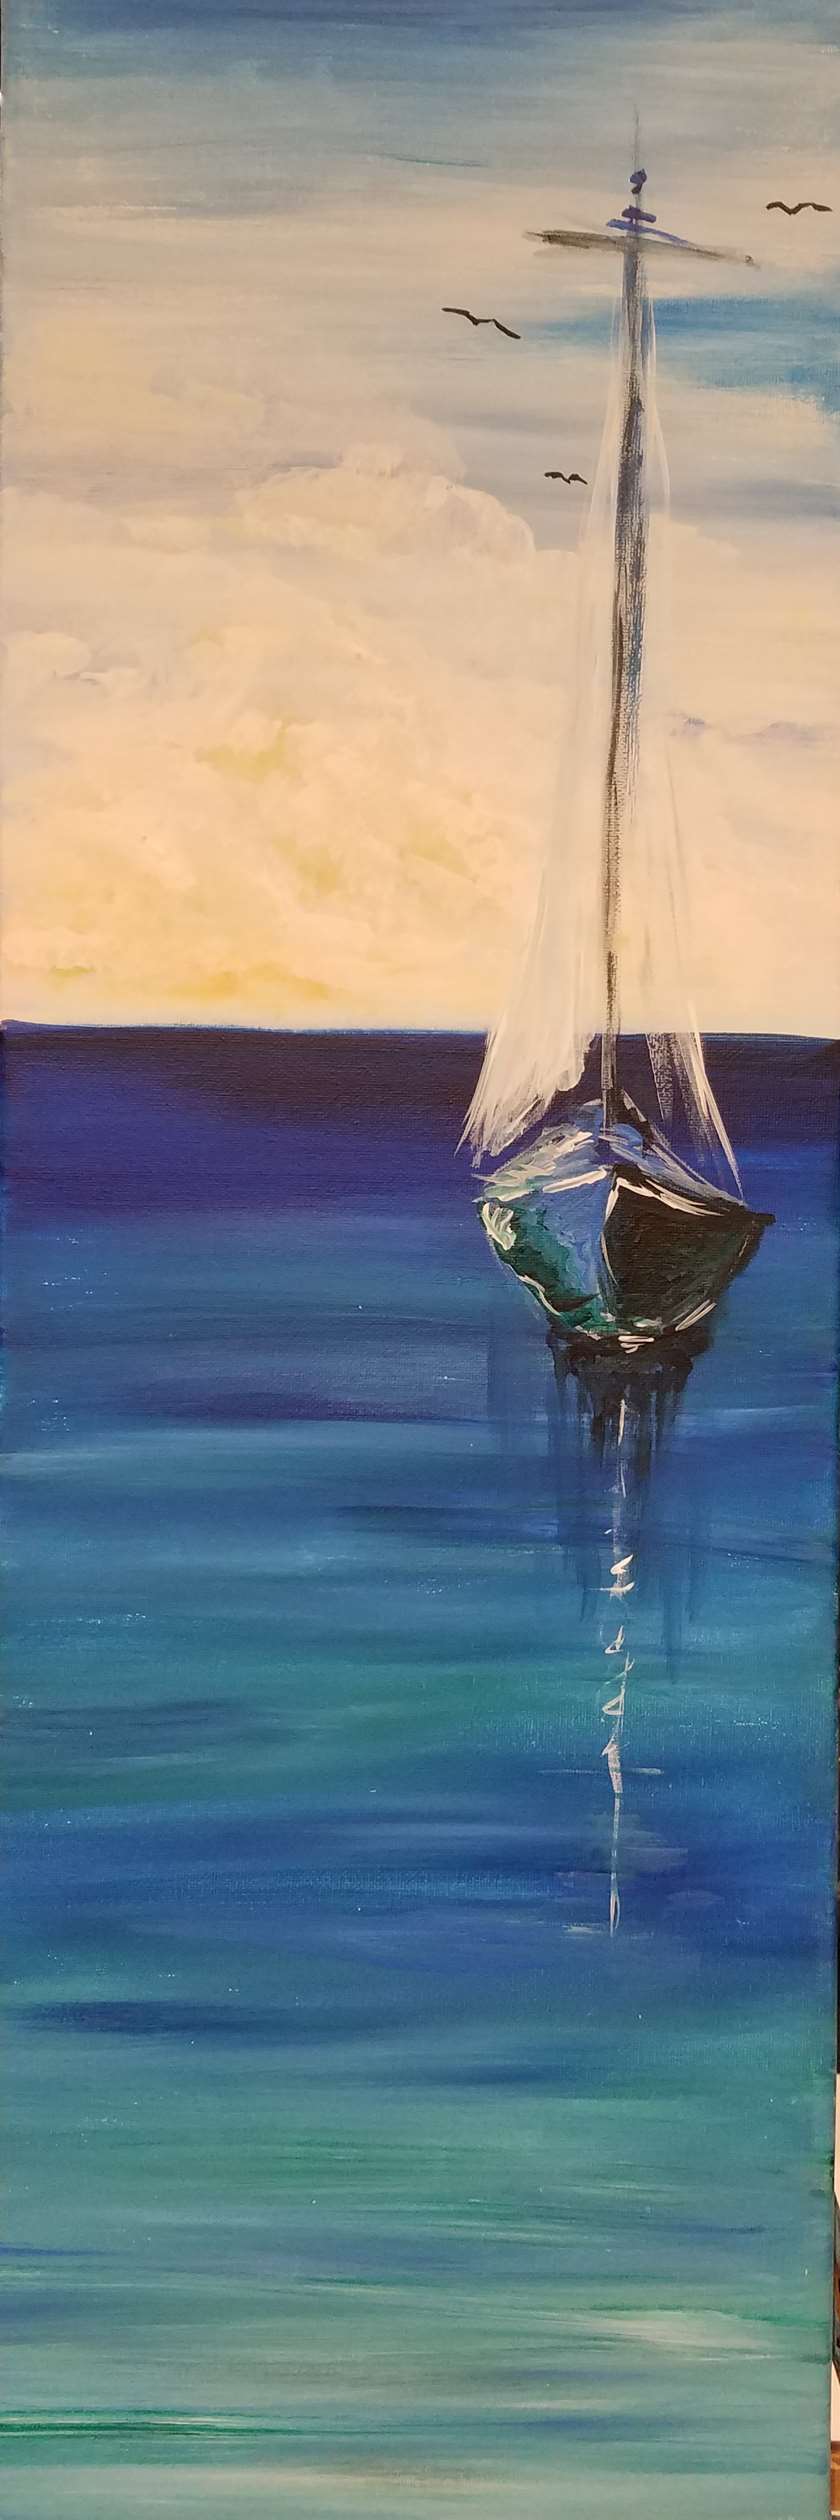 Paint ⛵️ on 10x30 inch canvas while sipping 🍷